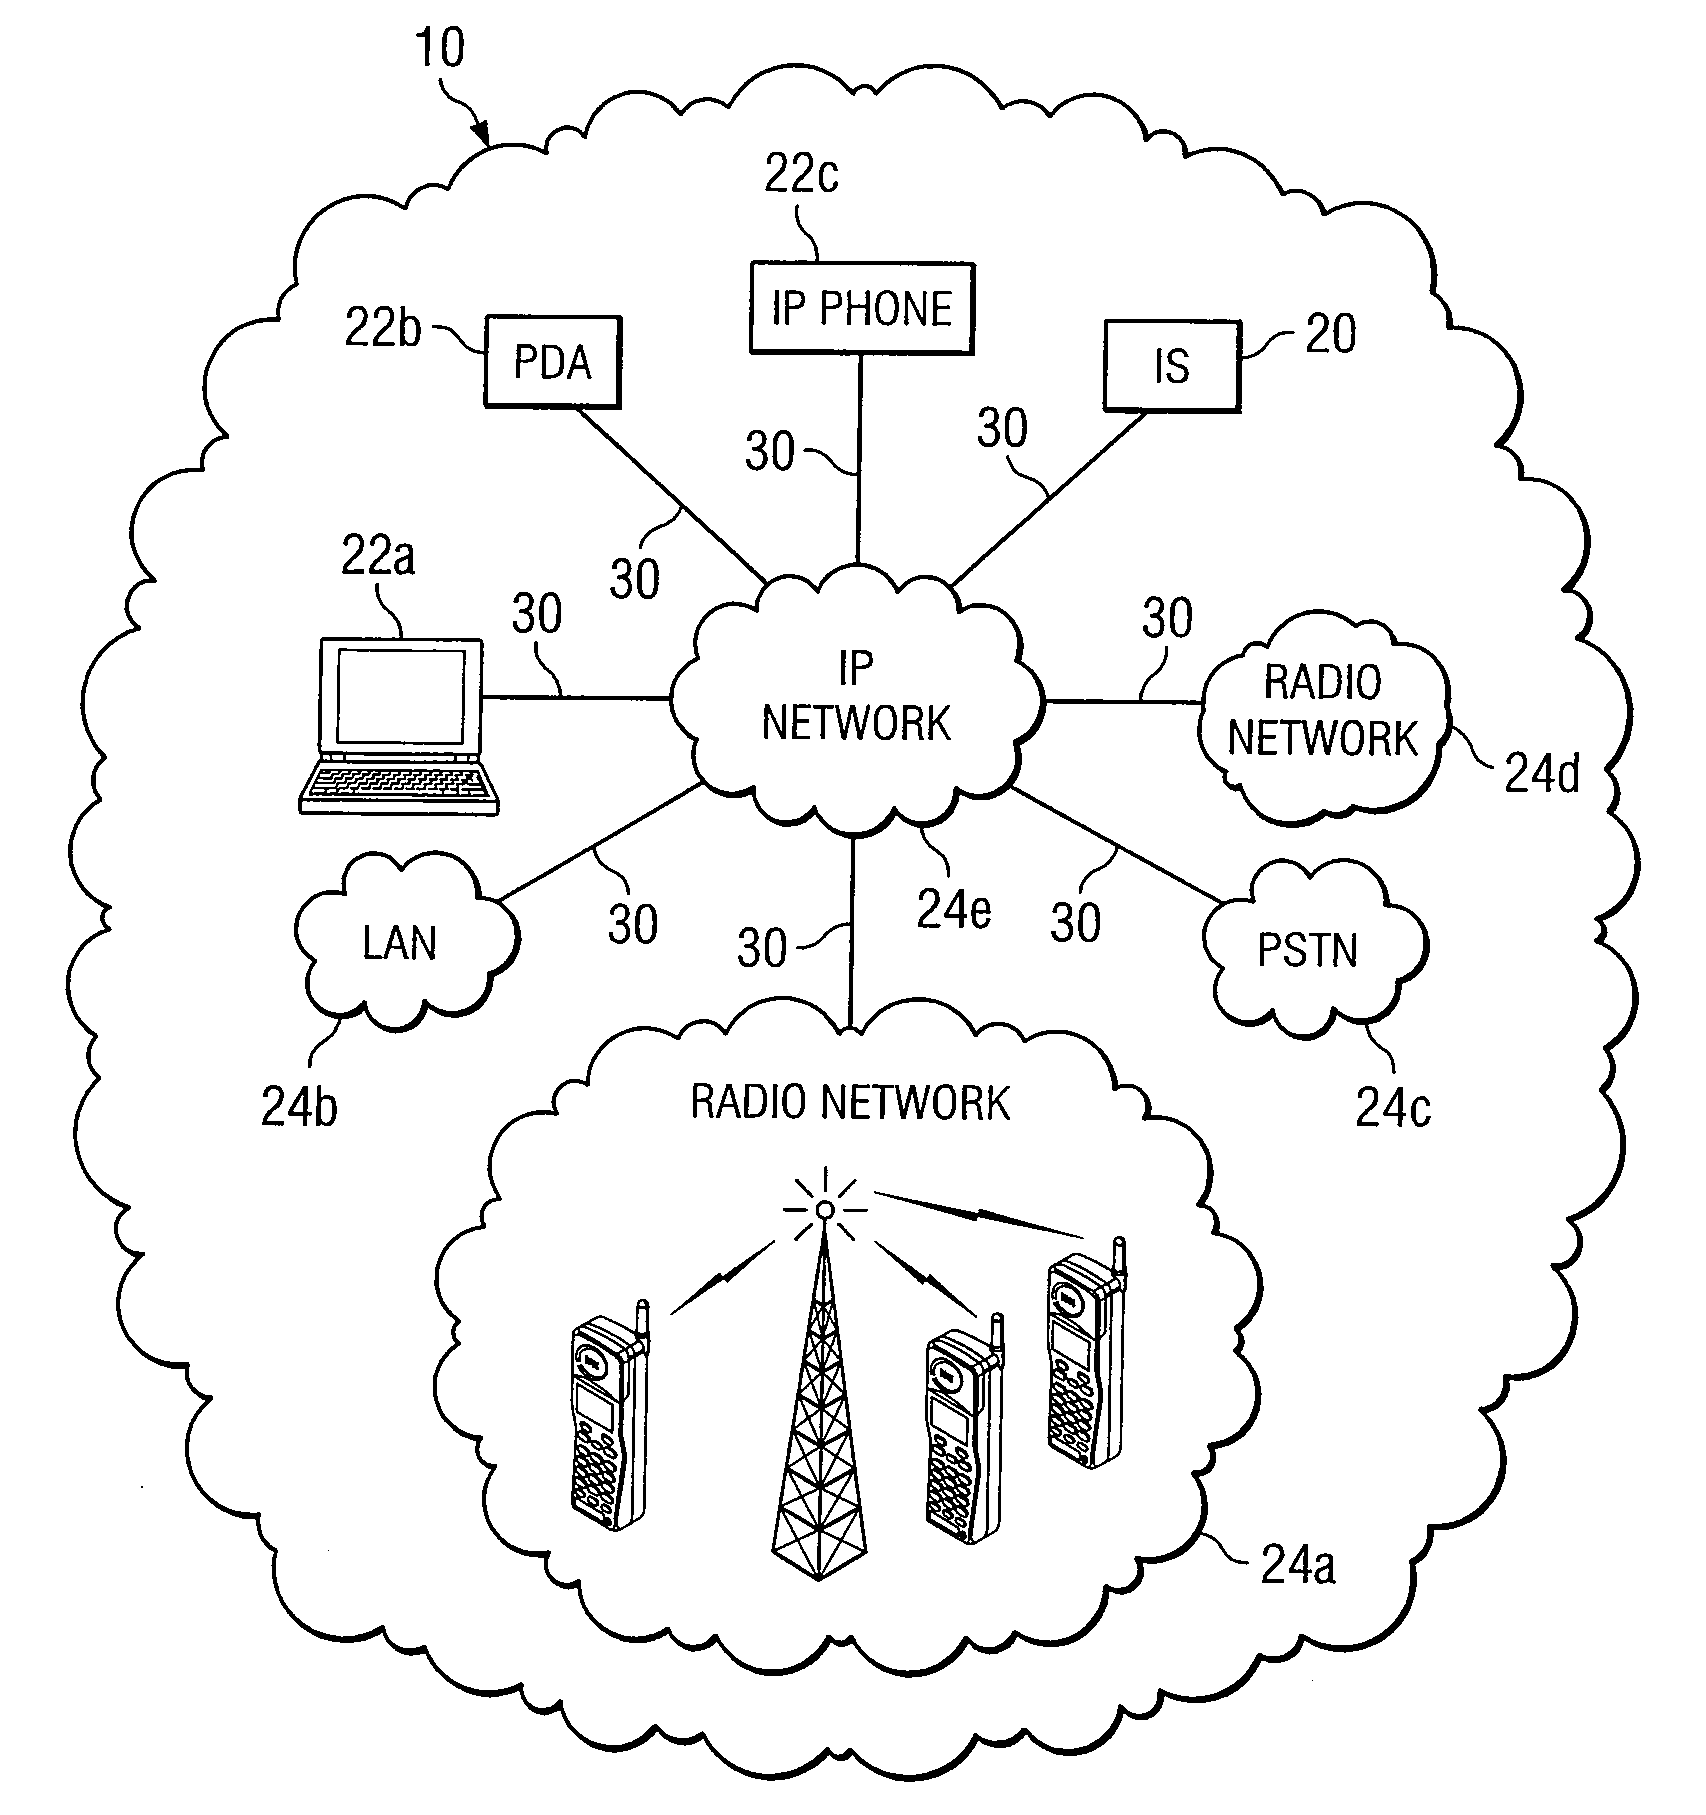 Method and System for Providing Congestion Management within a Virtual Talk Group